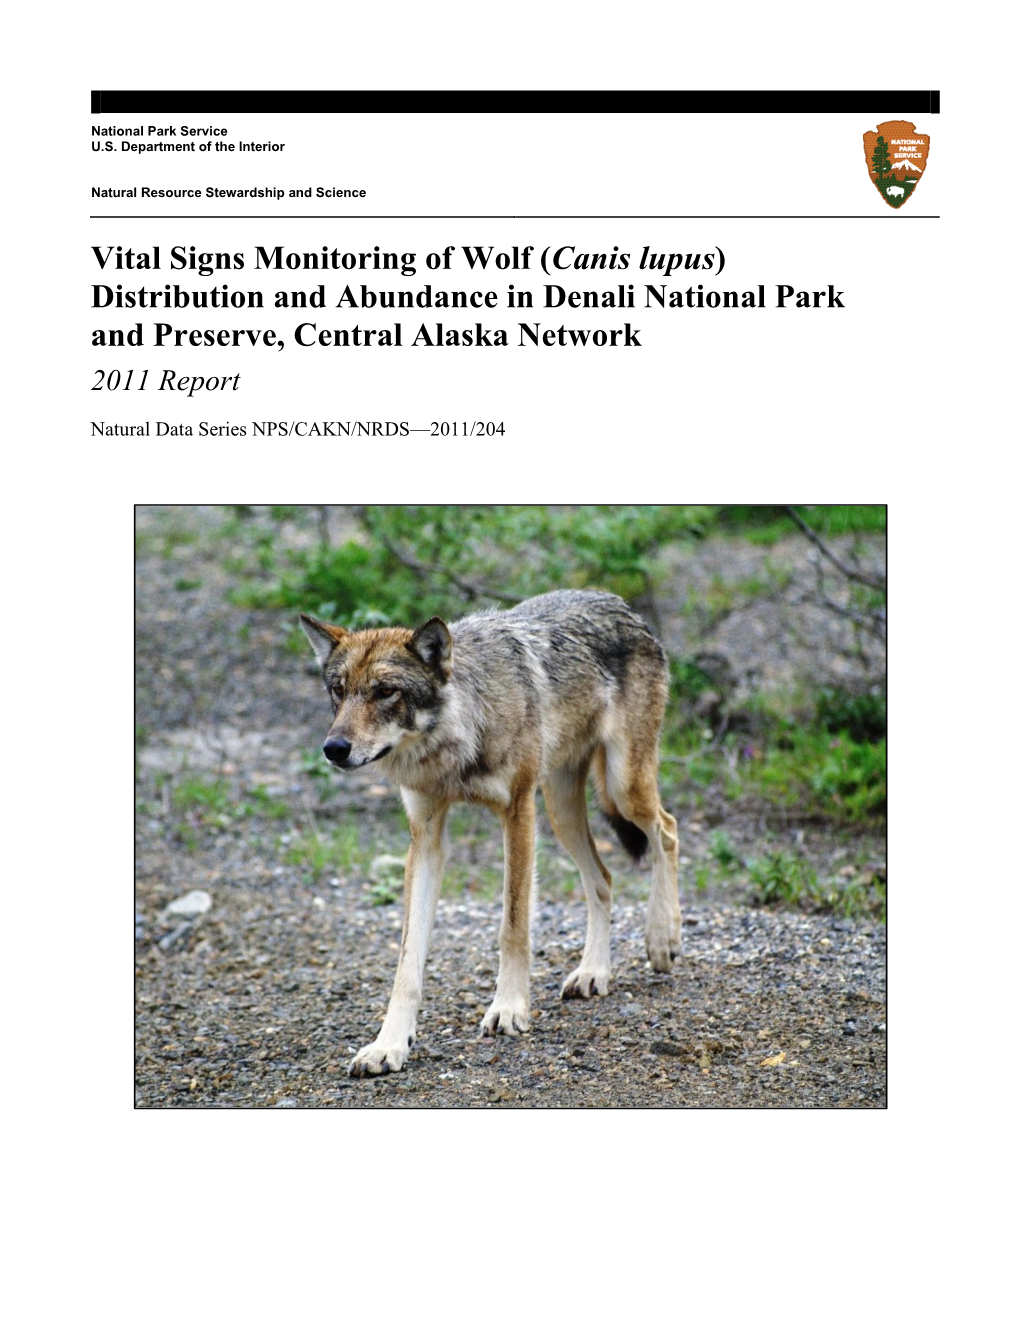 Vital Signs Monitoring of Wolf (Canis Lupus) Distribution and Abundance in Denali National Park and Preserve, Central Alaska Network 2011 Report